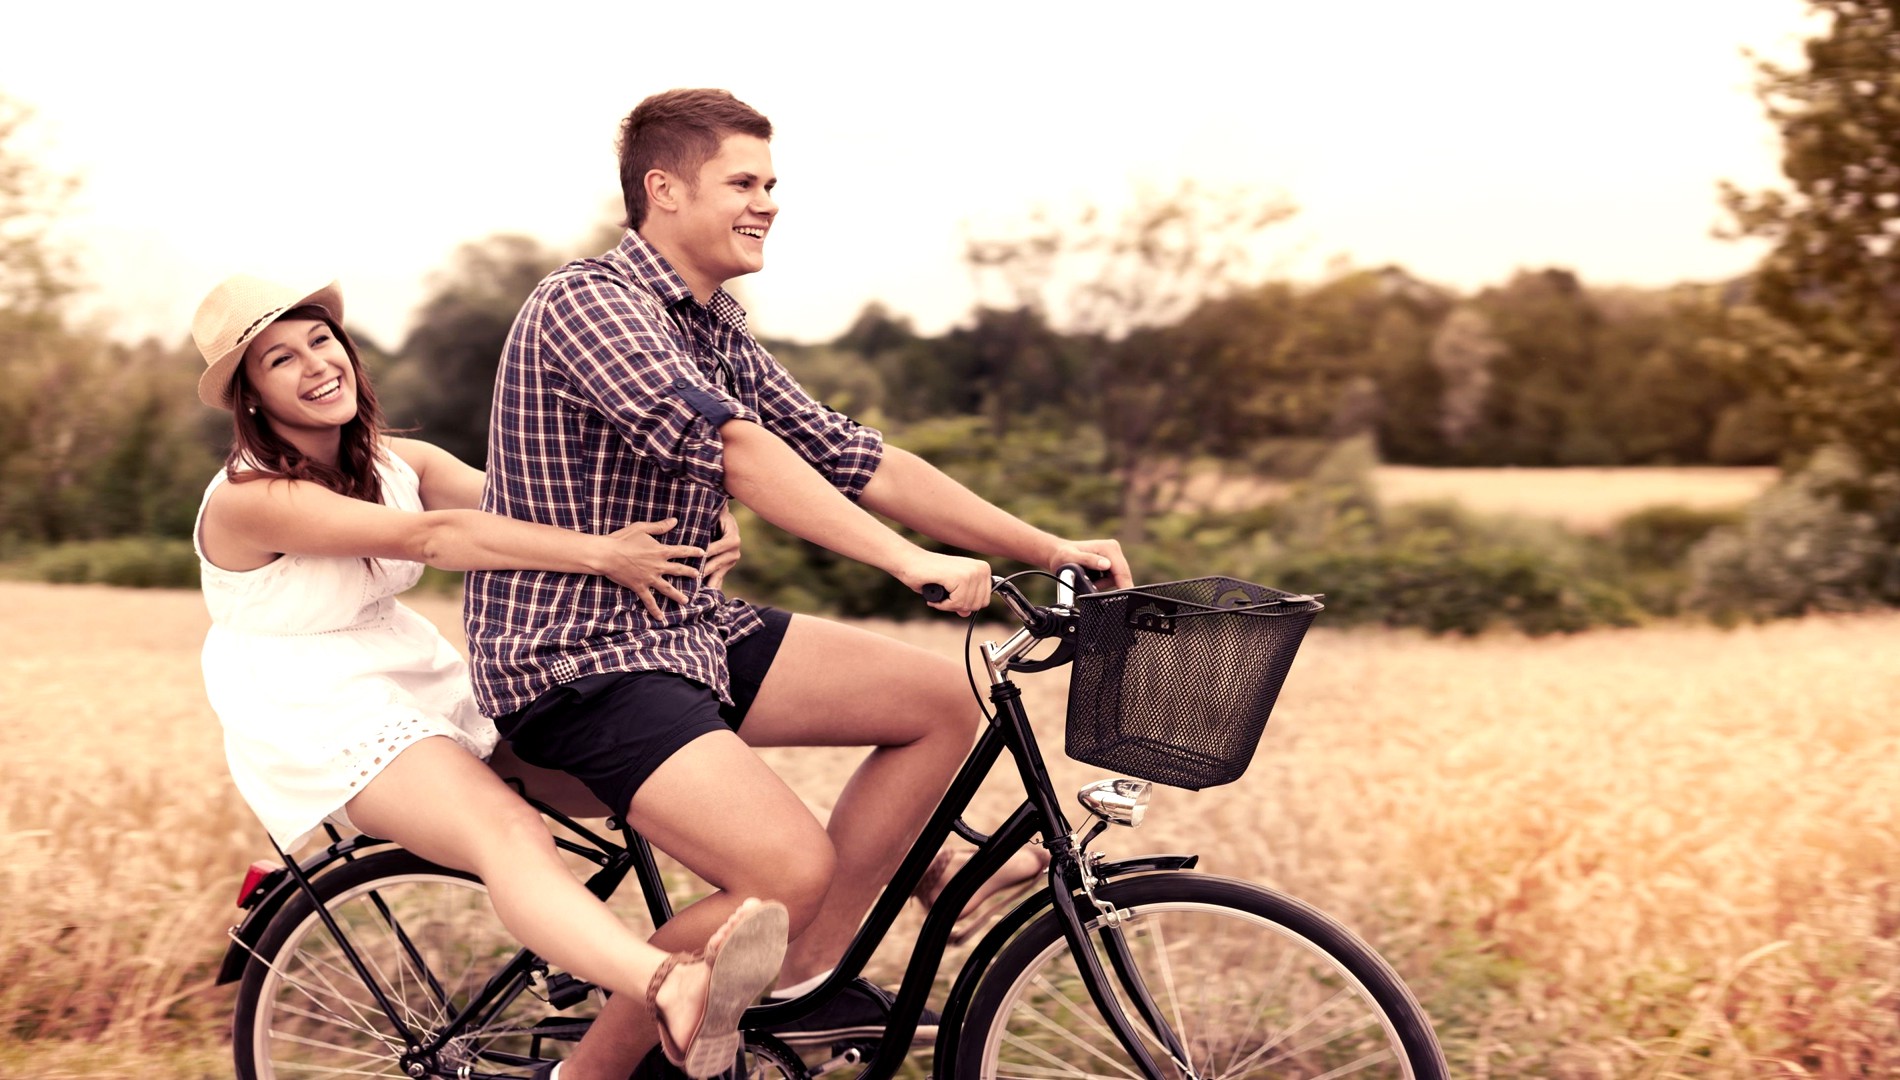 Couple-Love-Laughing-Mood-Cycle-HD-Wallpapers - Eligible Magazine